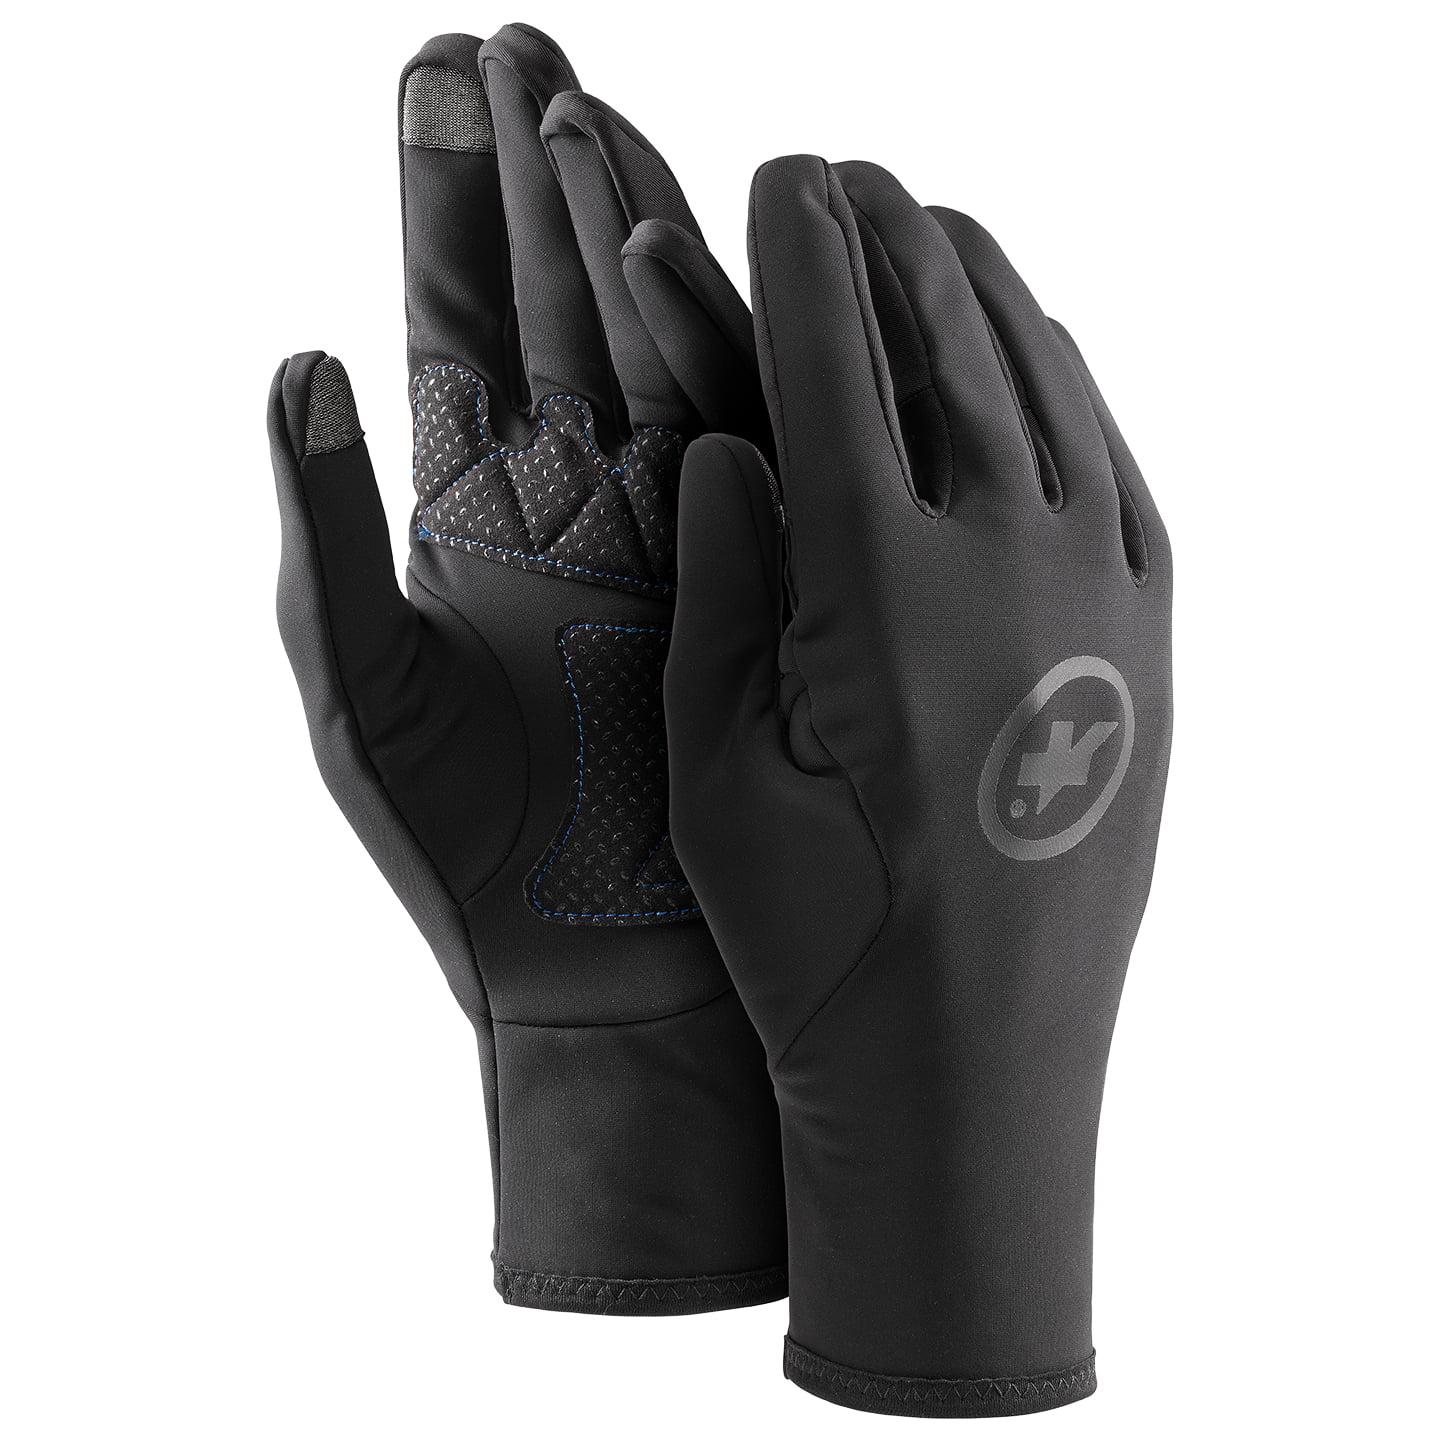 ASSOS EVO Winter Gloves Winter Cycling Gloves, for men, size L, Cycling gloves, Bike gear